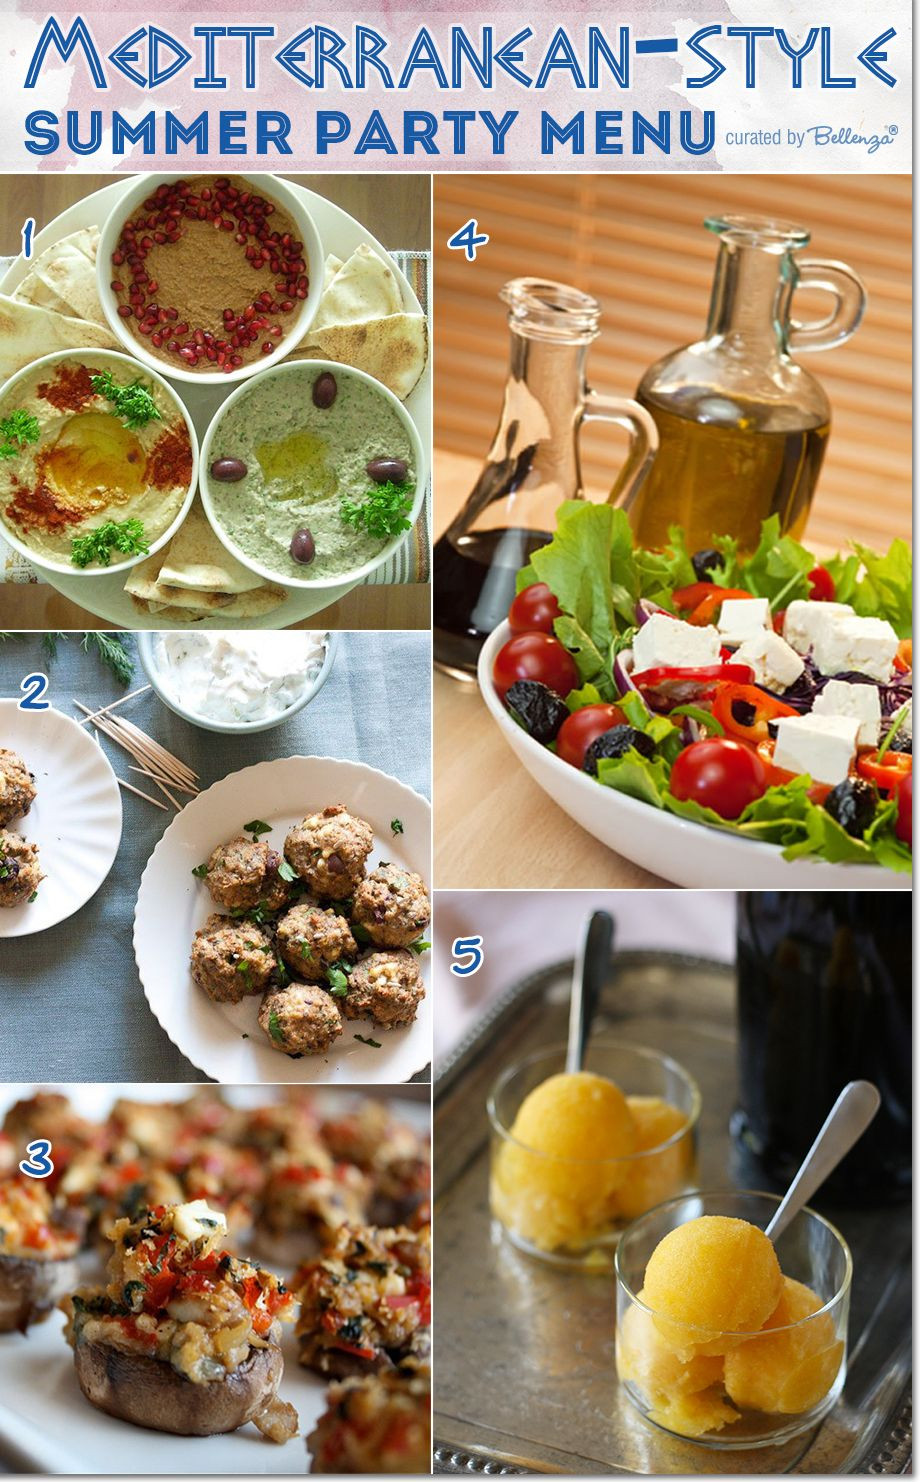 Menu Ideas For Summer Dinner Party
 Menu Ideas for Hosting a Mediterranean style Summer Party